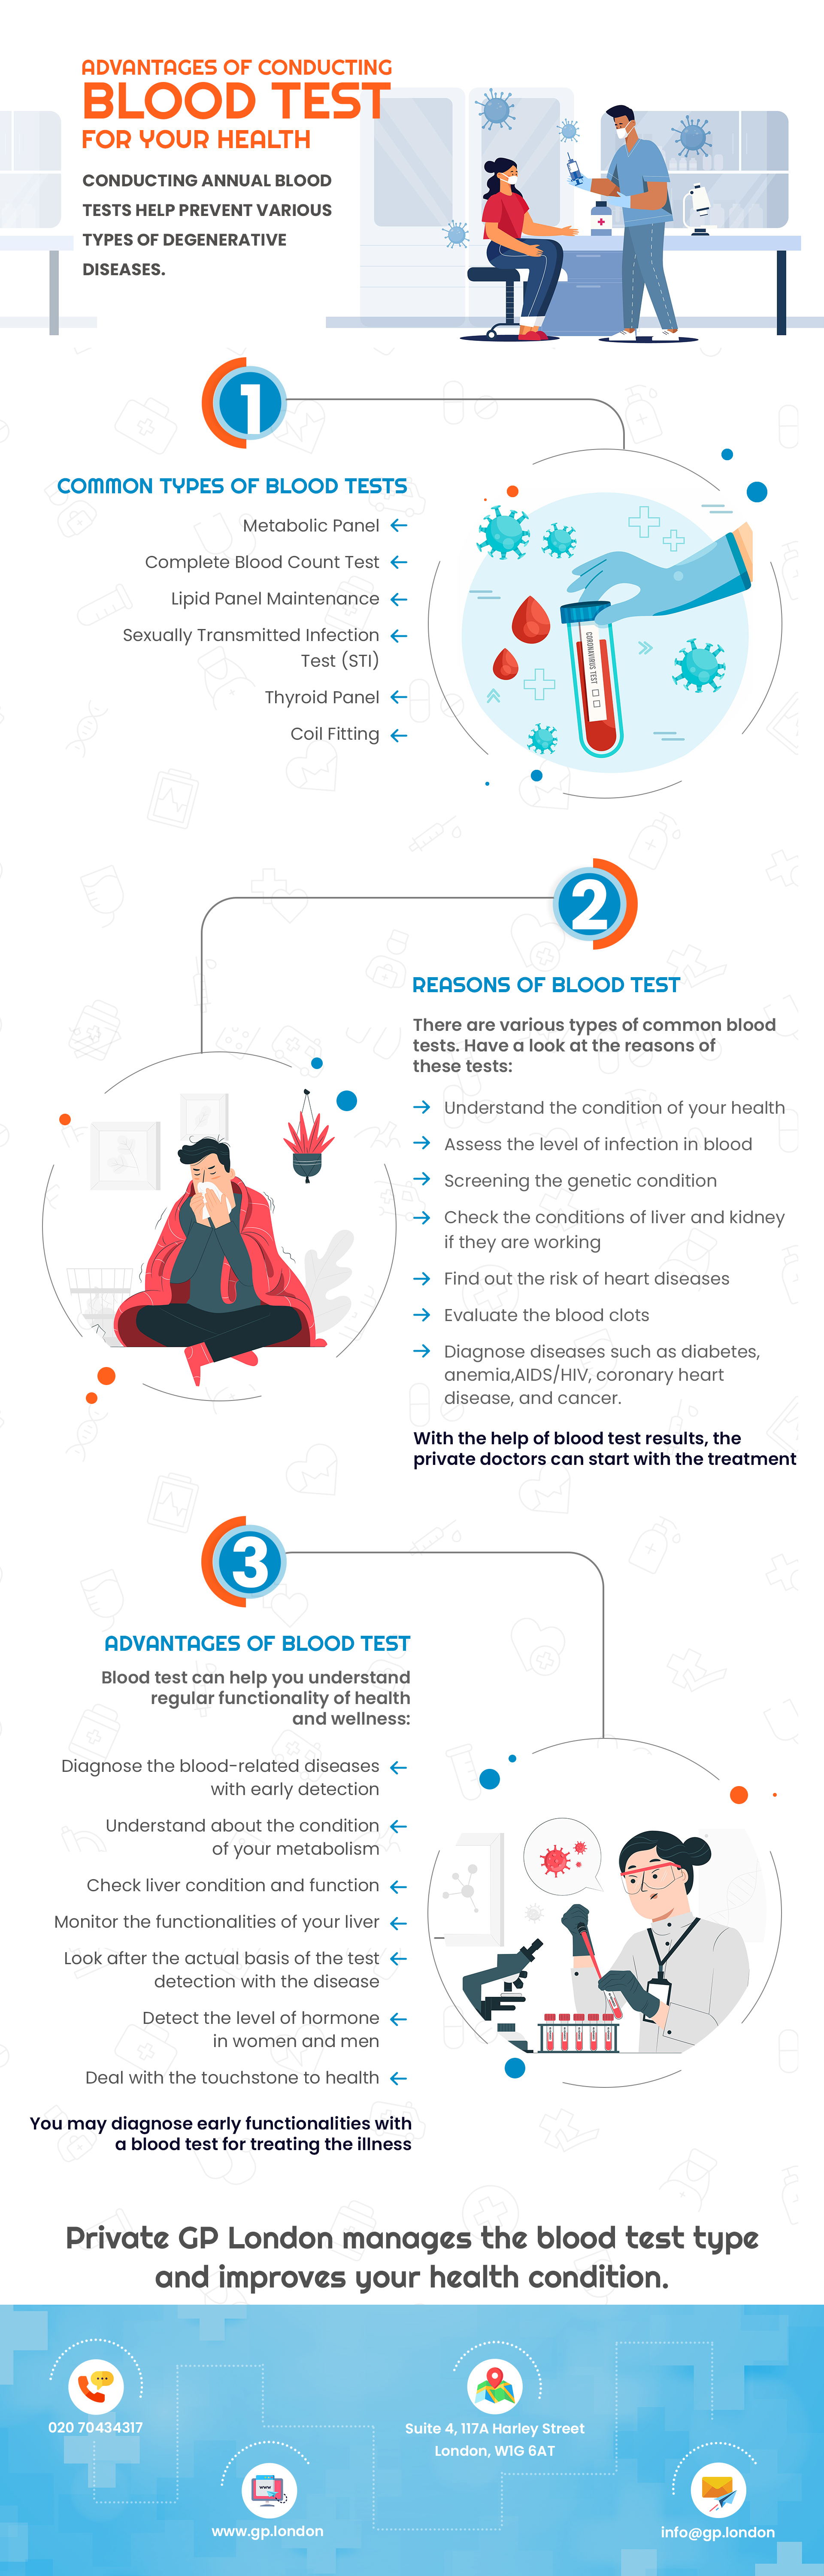 Advantage of conducting blood test for your health